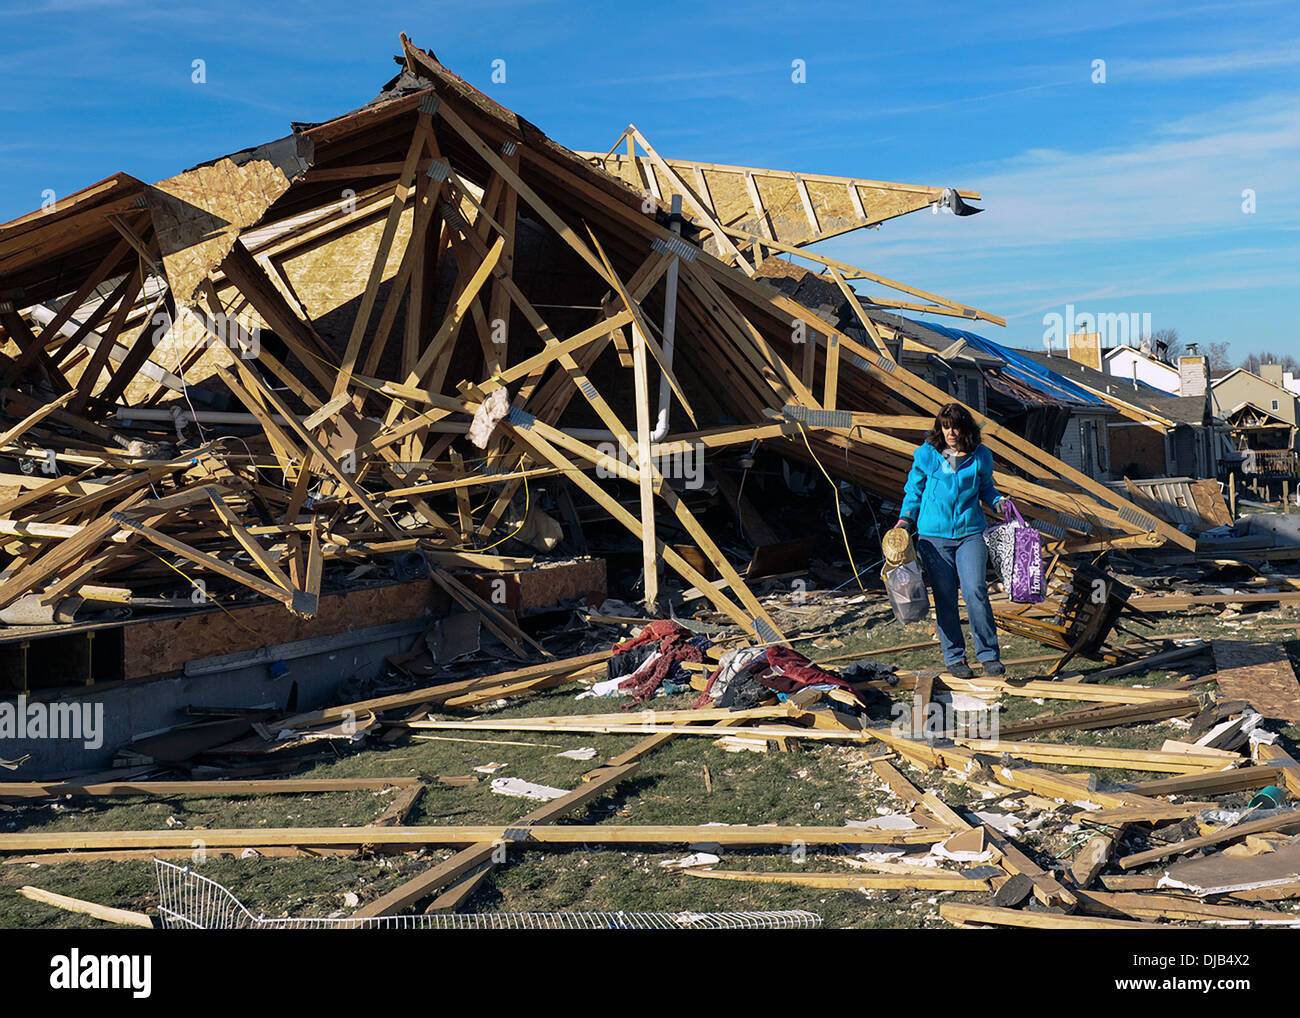 A resident recovers items from her home destroyed by an EF-4 tornado November 19, 2013 in Washington, IL. The tornado left a path of destruction that stretched for more than 46 miles and damaged fourteen-hundred homes. Stock Photo